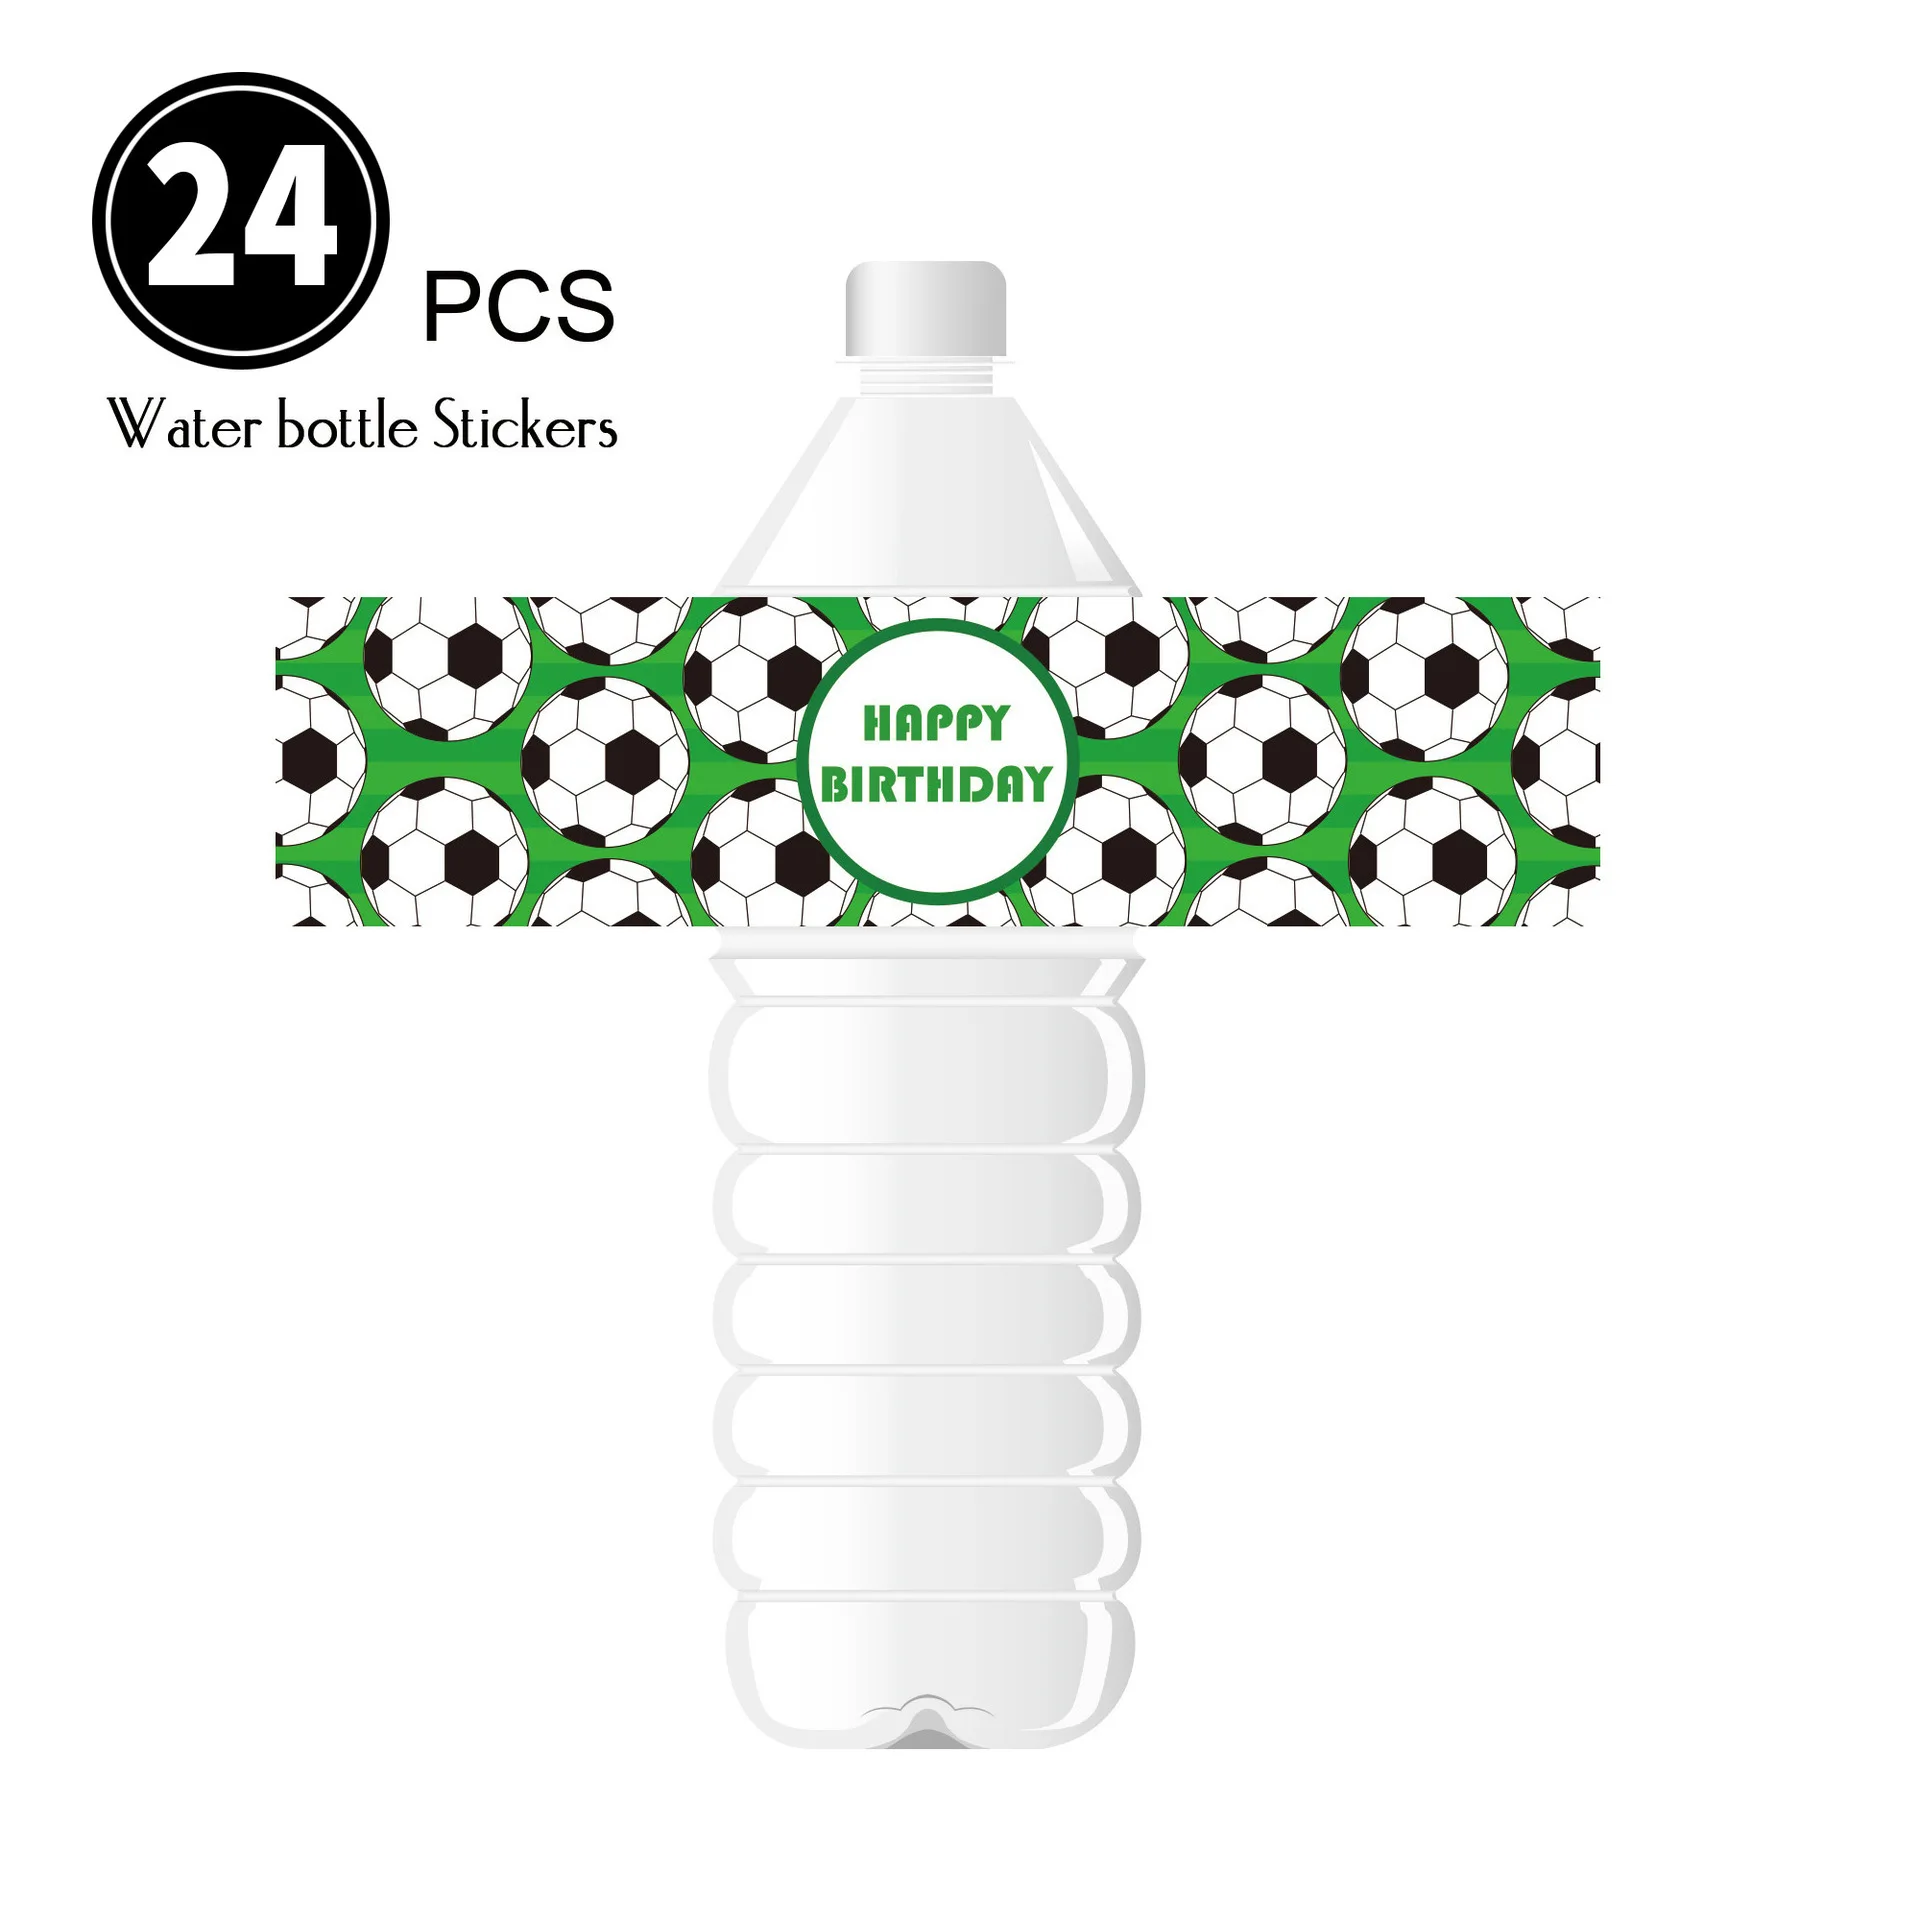 24Pcs Happy Birthday Football Basketball Water Bottle Stickers Birthday Party Decoration For Kids